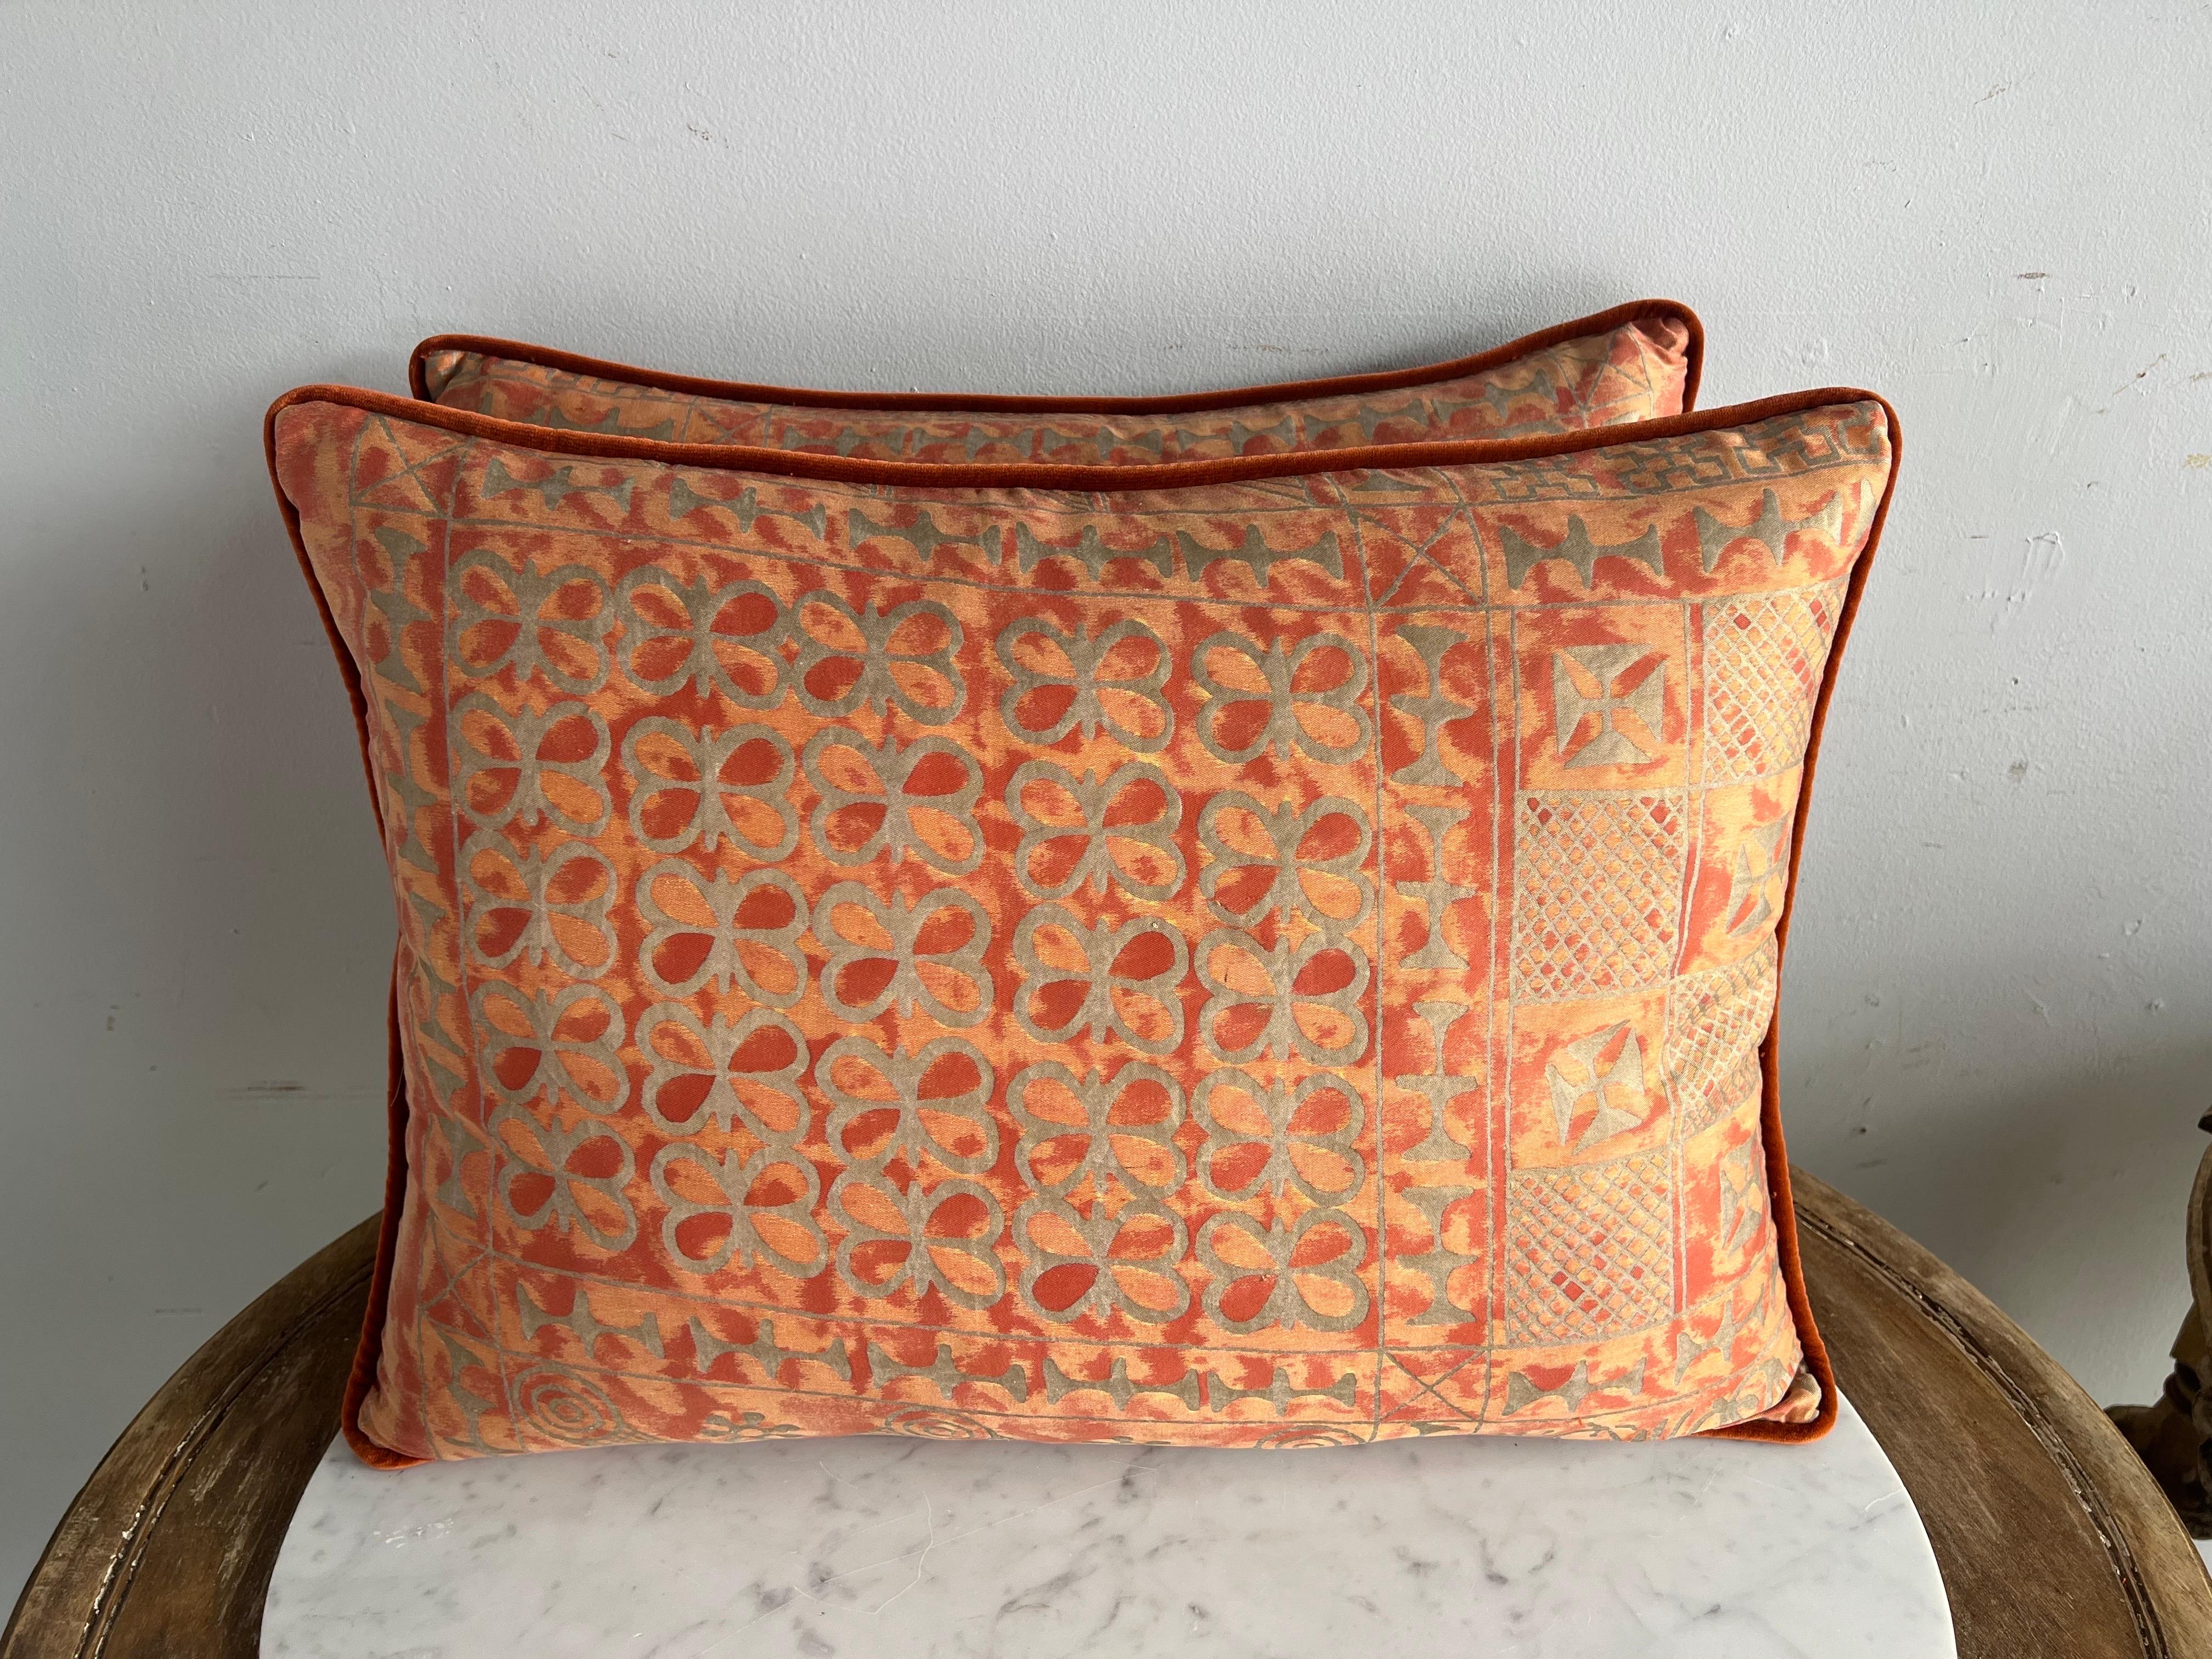 Pair of pillows made with vintage bittersweet and metallic gold Fortuny textile fronts and coral velvet backs. Self cord detail. Down inserts, sewn closed.